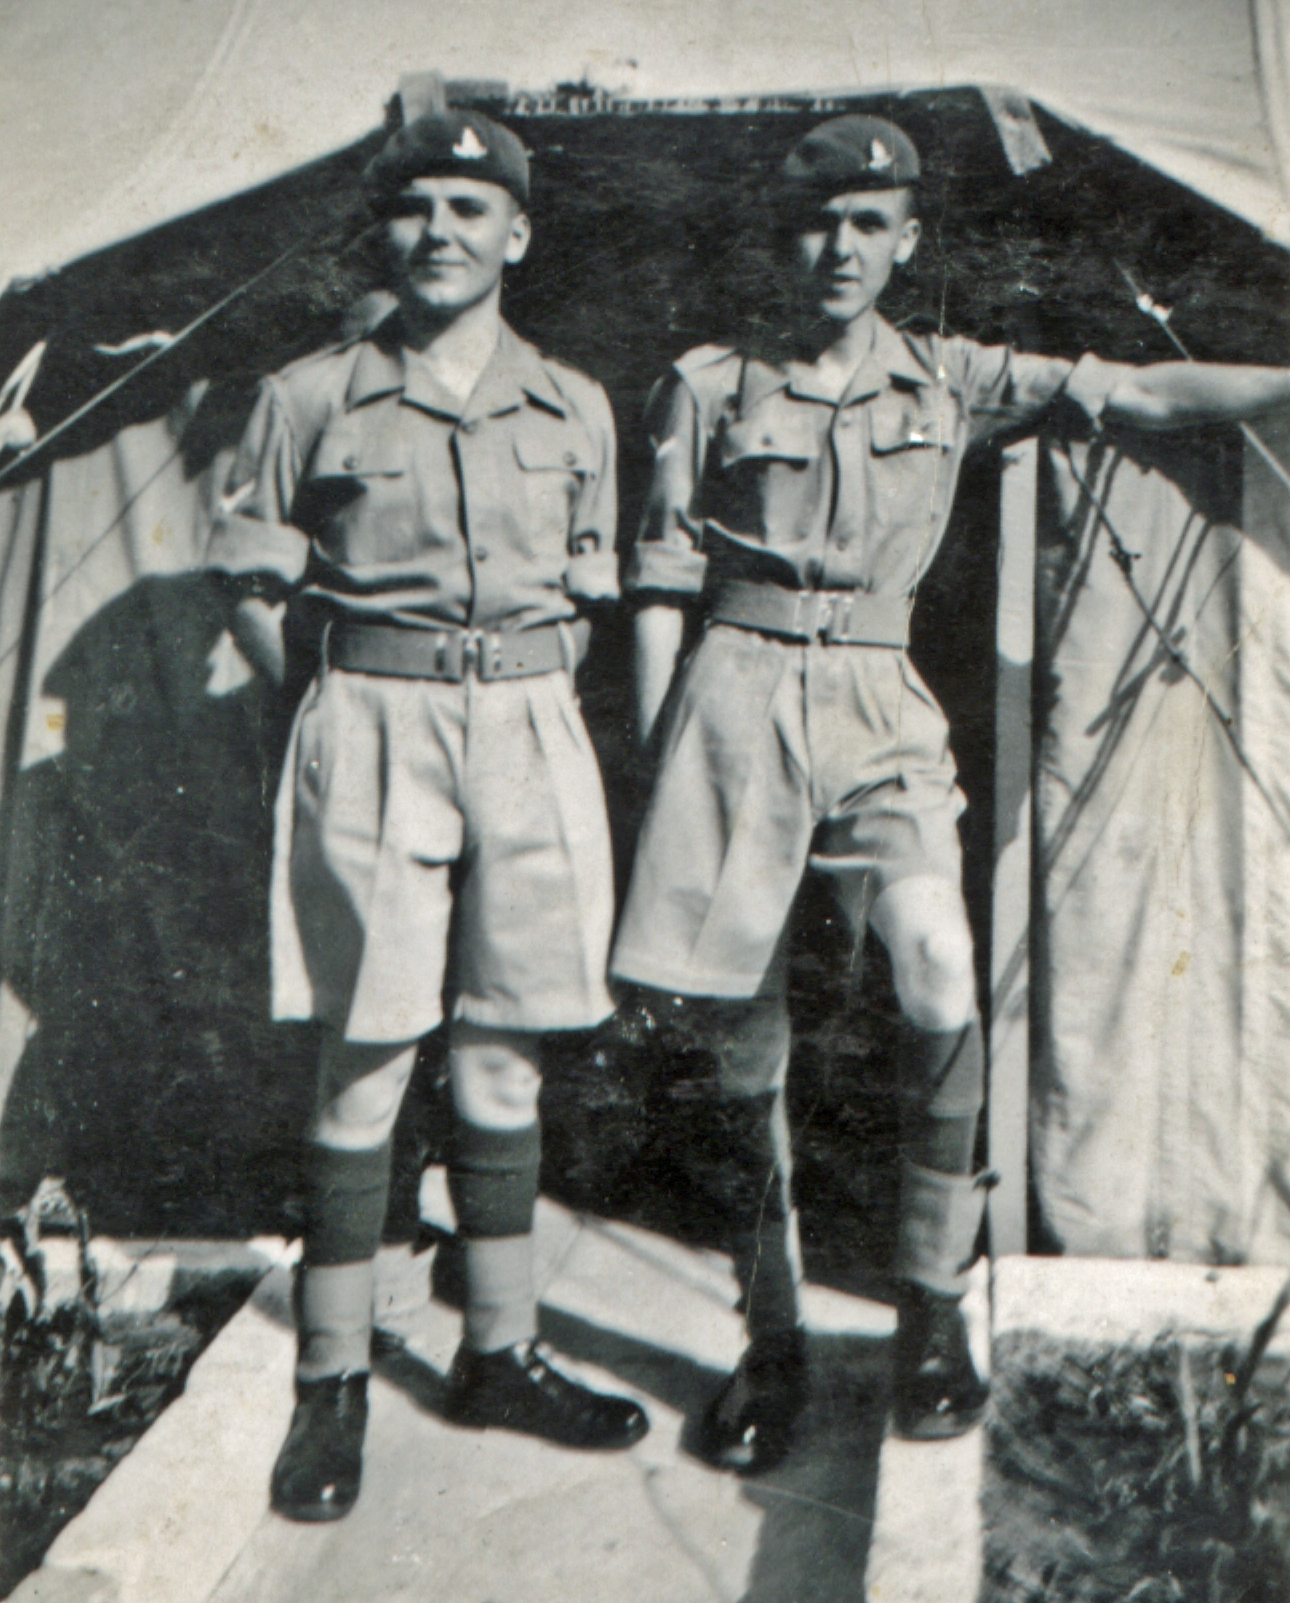 two men in military uniform pose for the camera